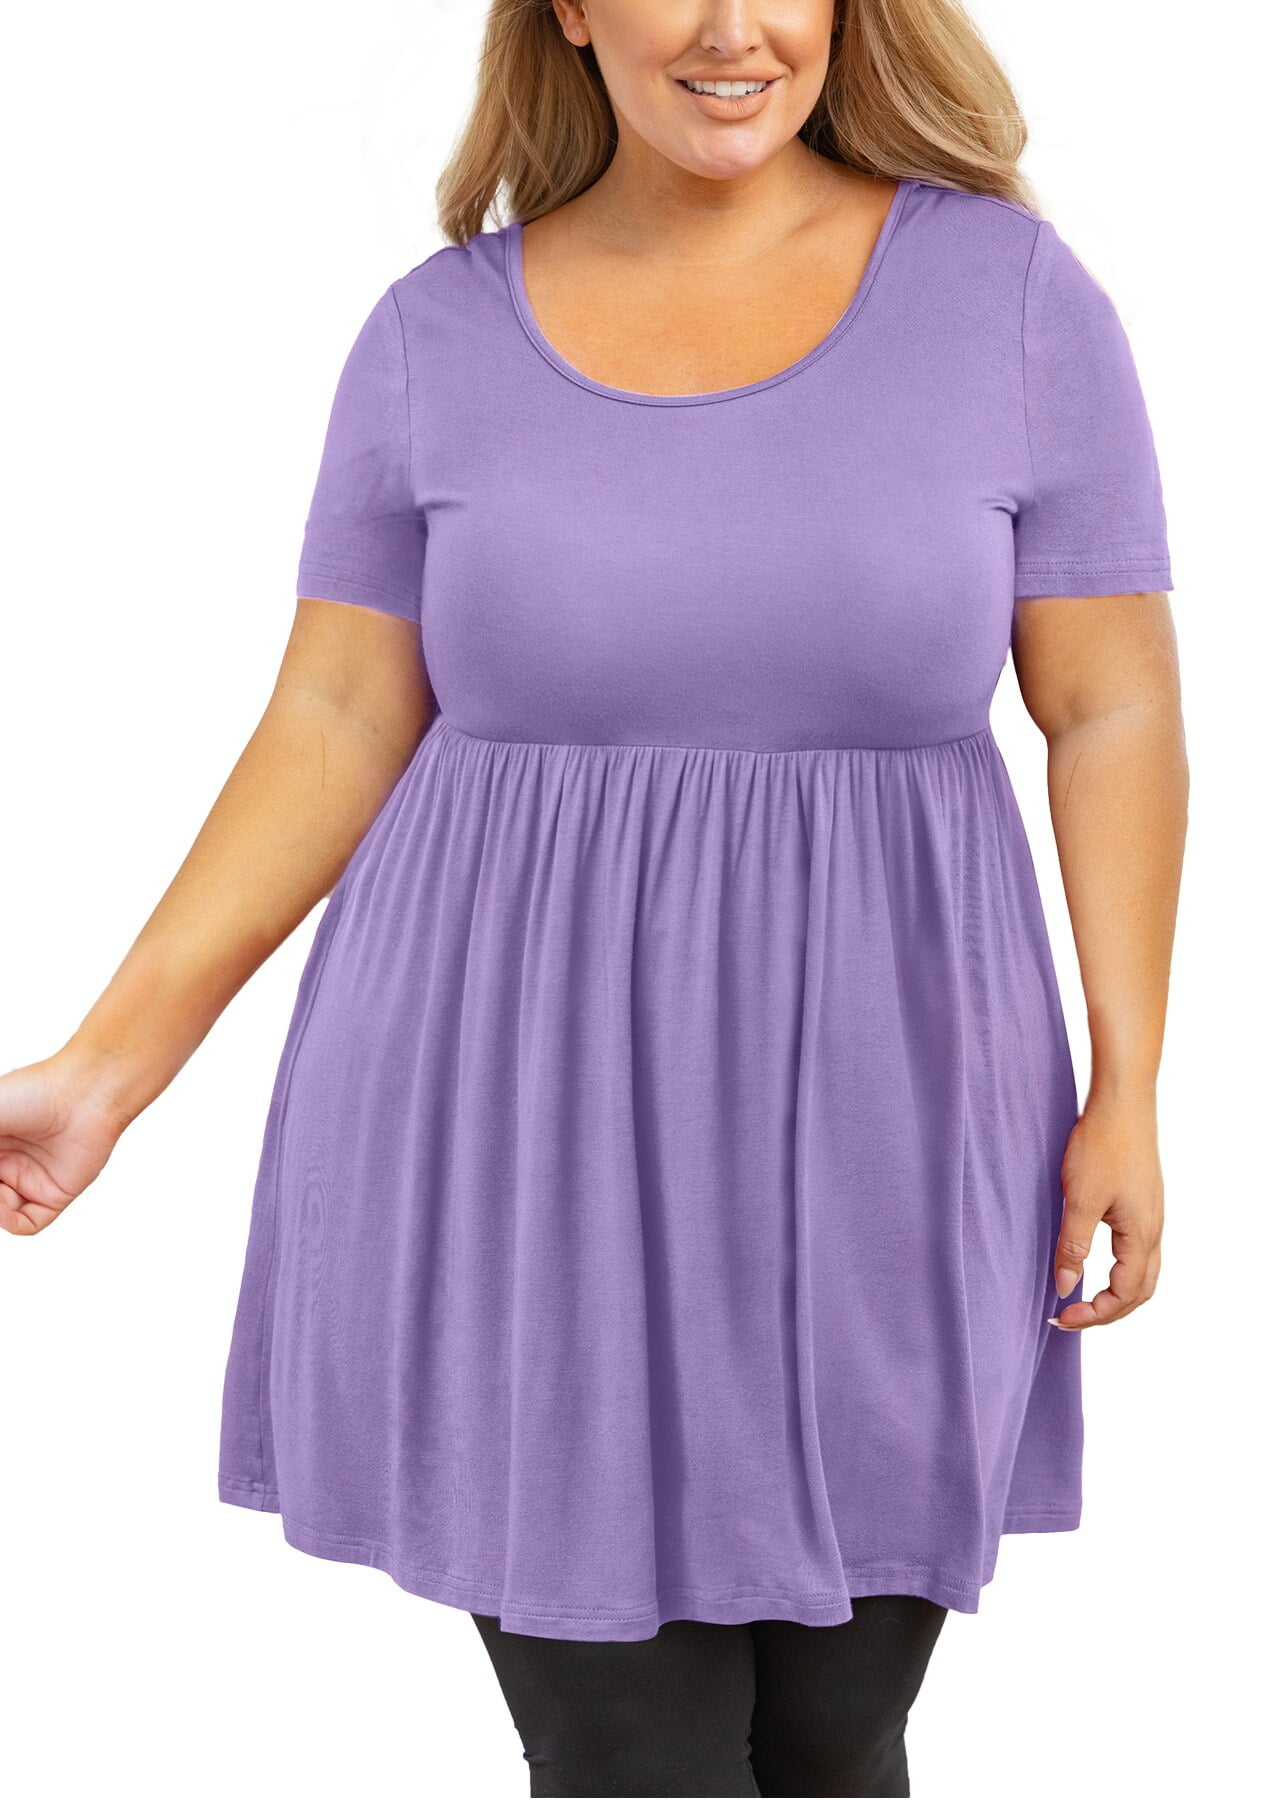 SHOWMALL Plus Size Tunic for Women Short Sleeve Scoop Neck Top